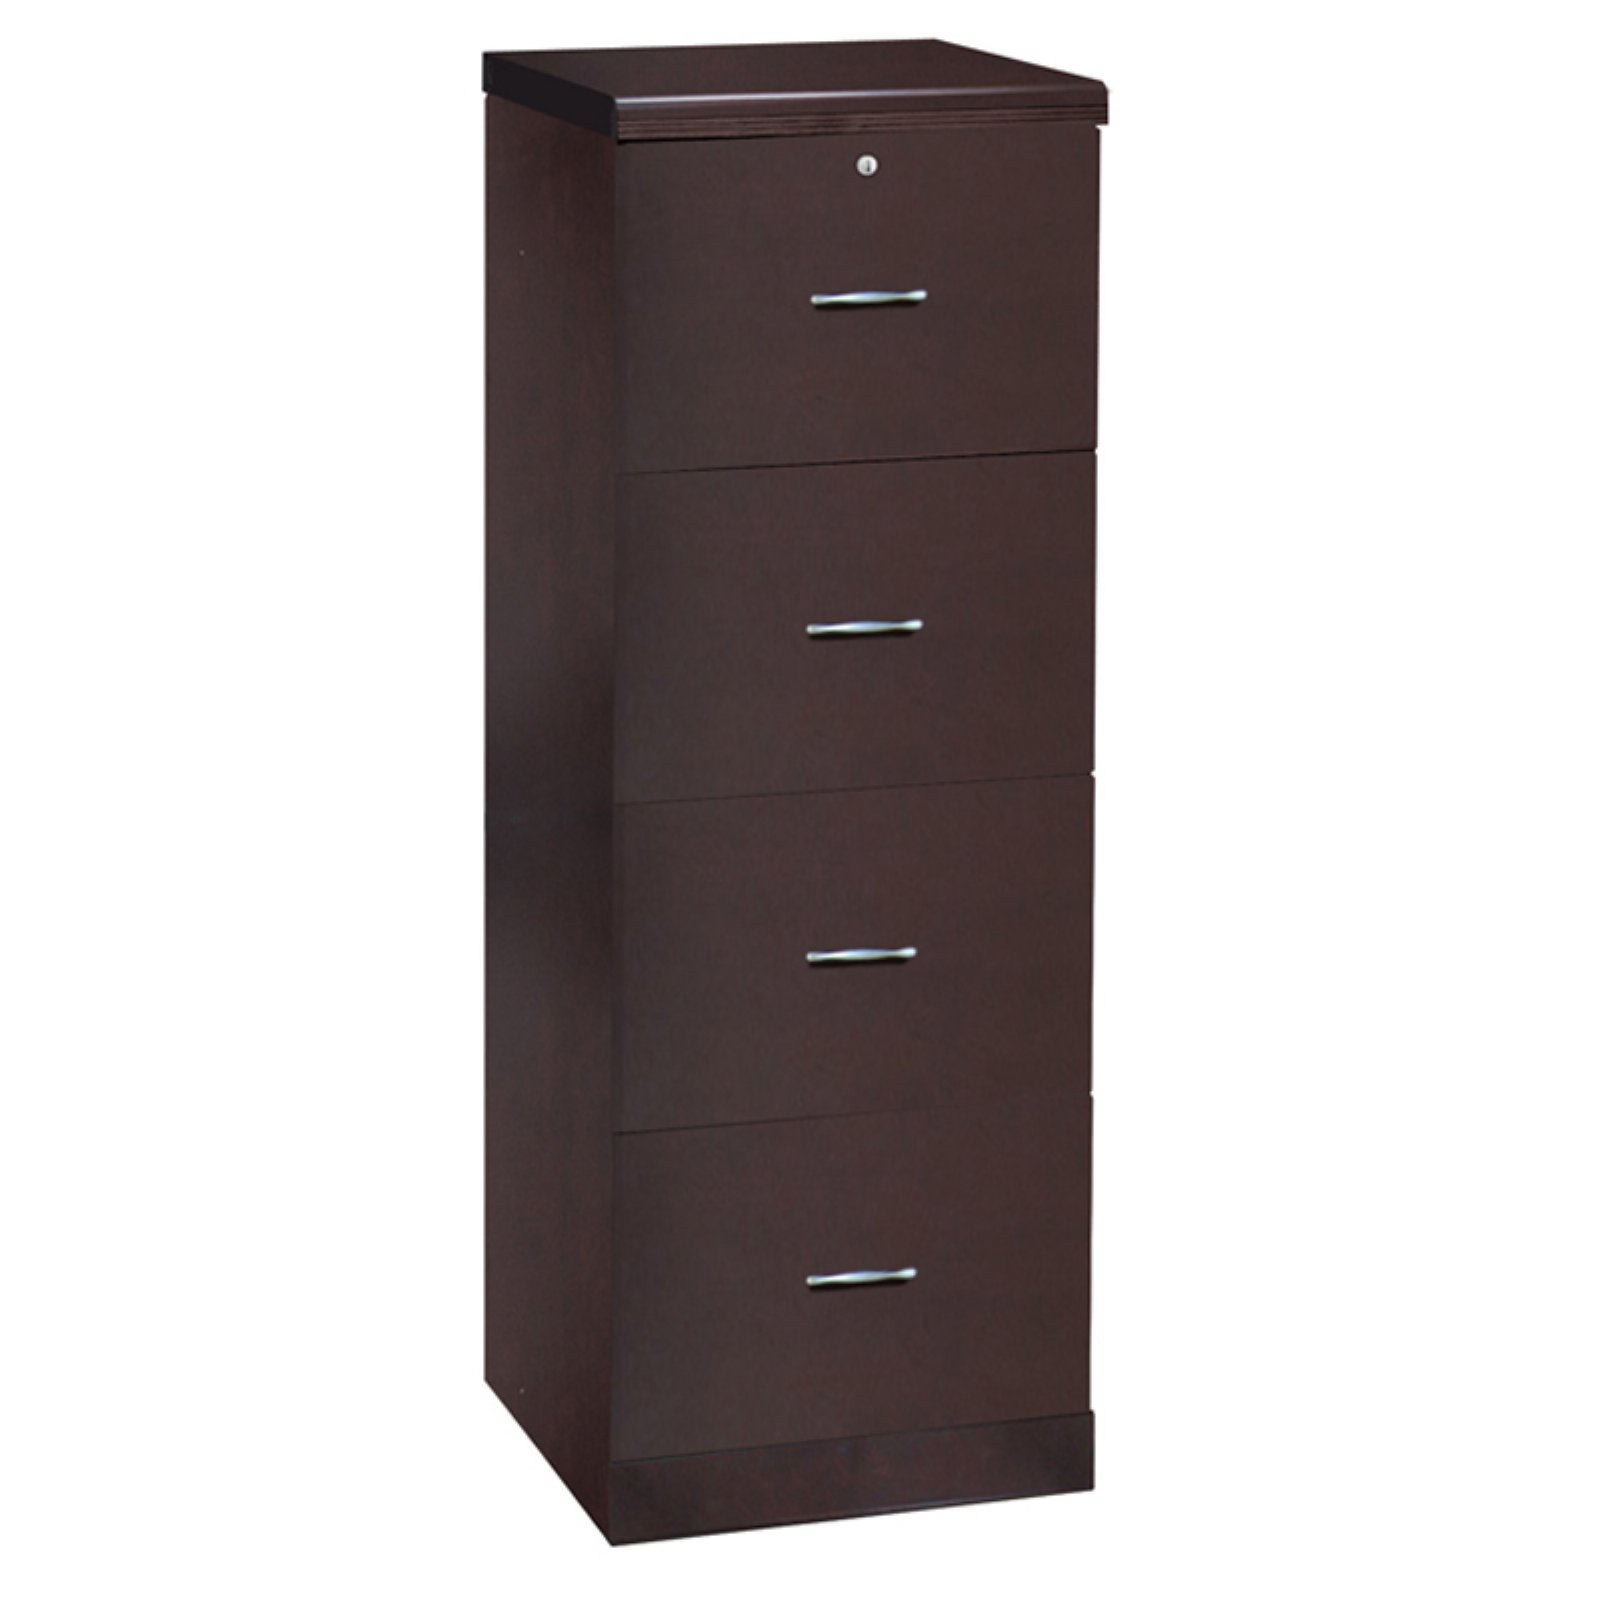 4 Drawer Vertical Wood Lockable Filing Cabinet Espresso Walmart with regard to sizing 1600 X 1600